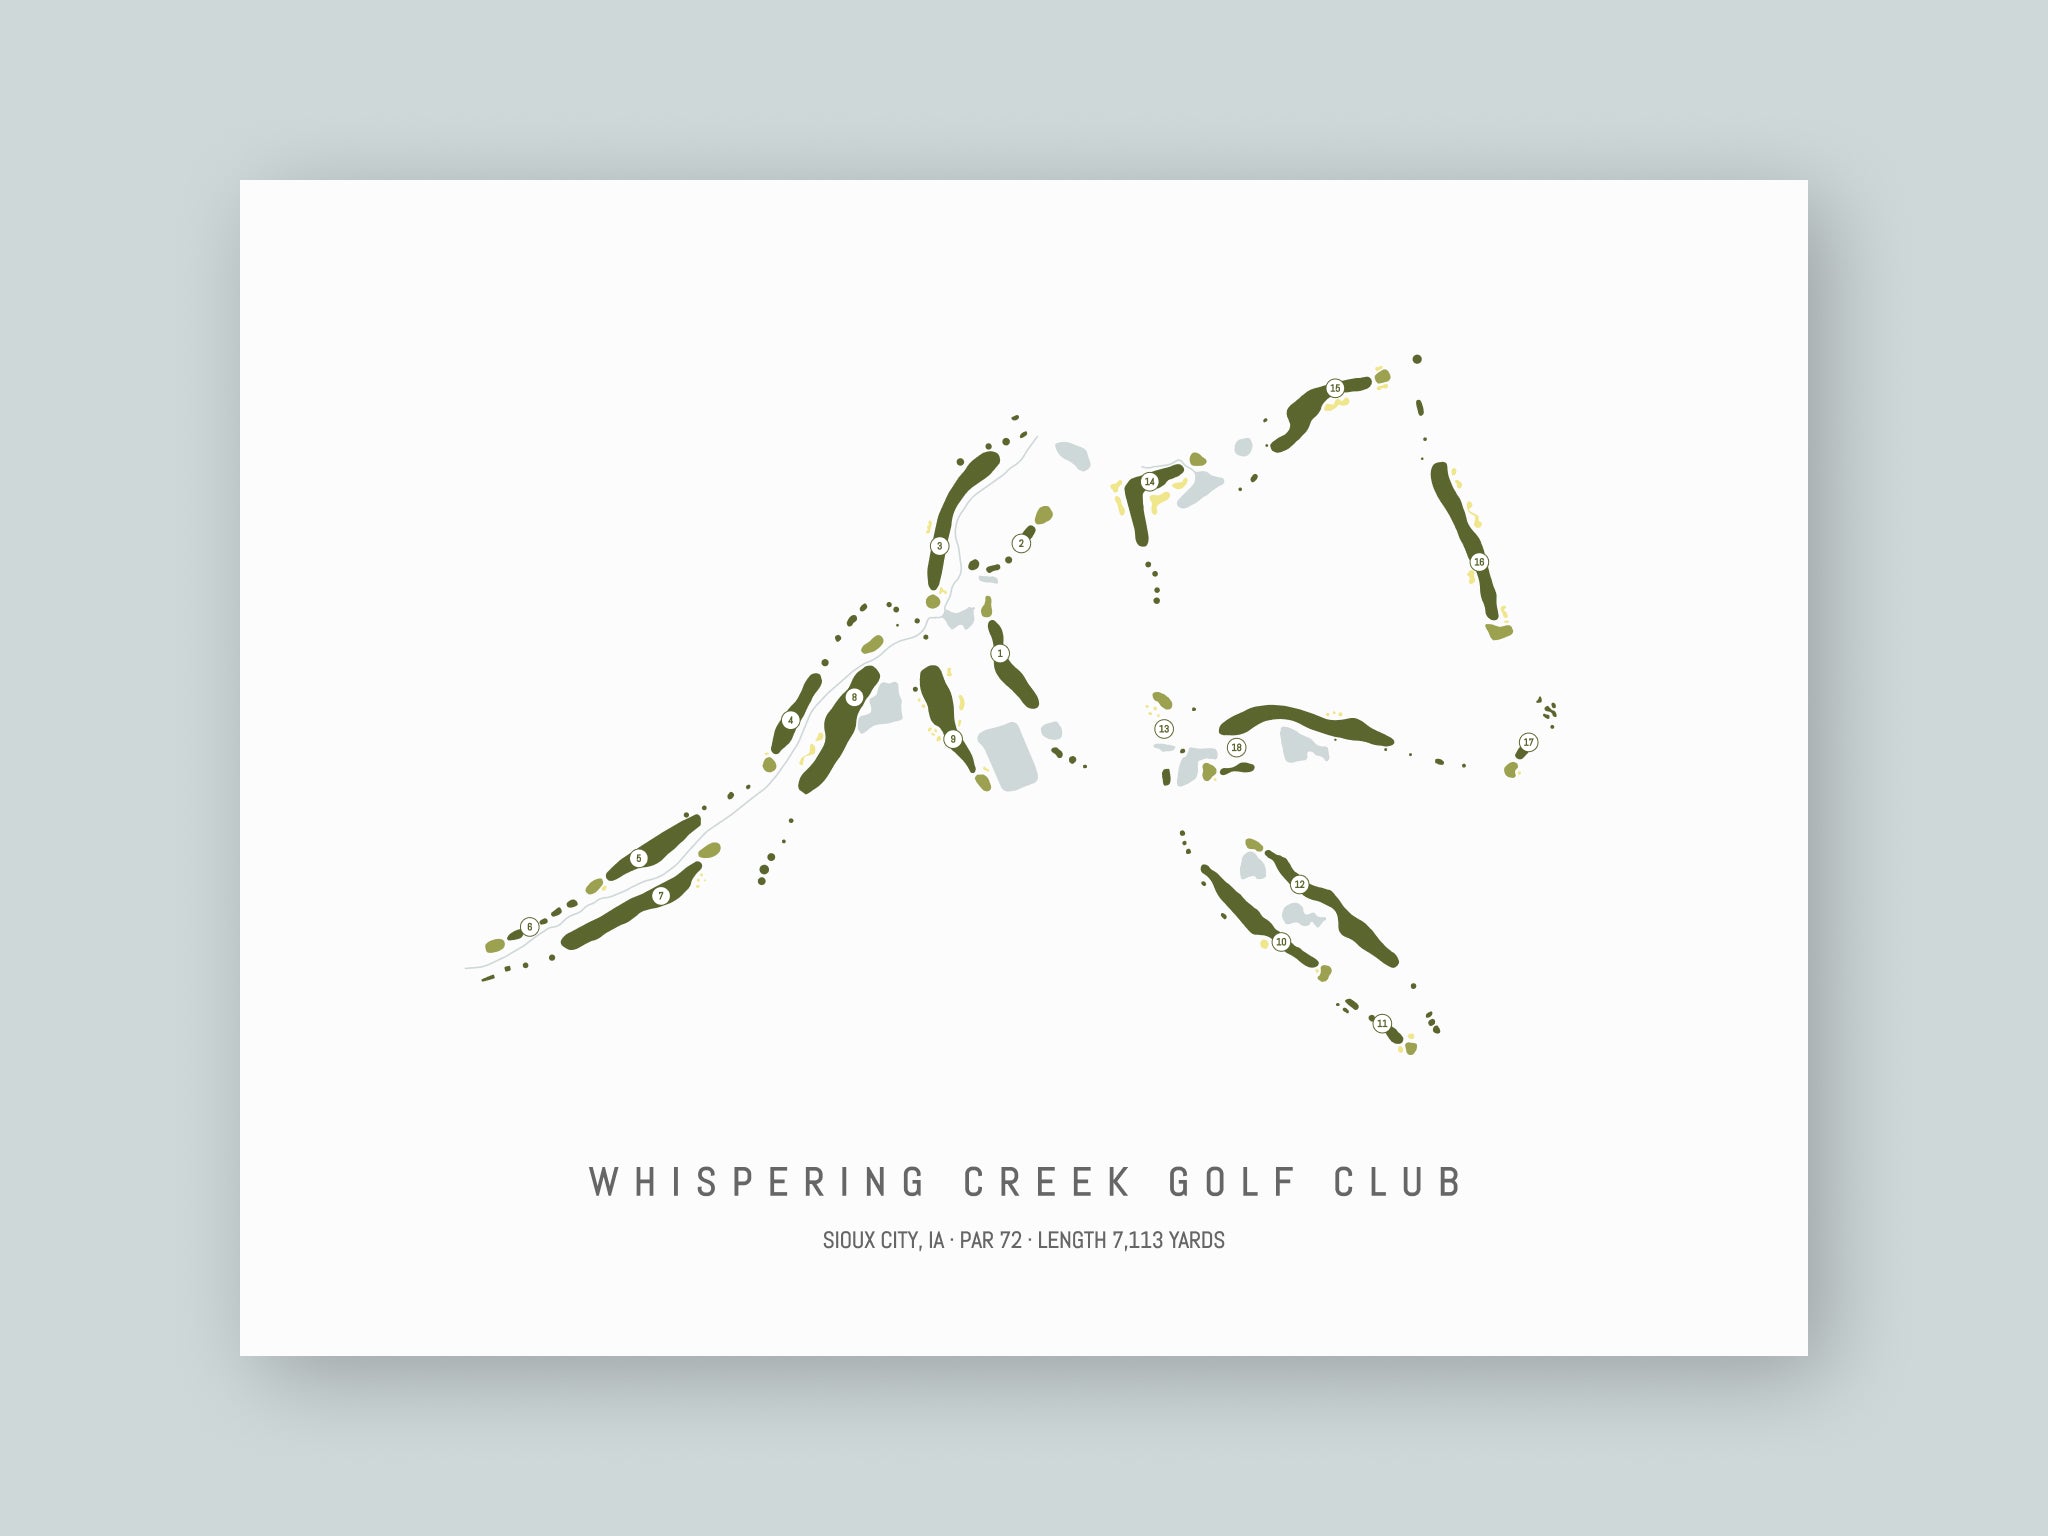 Whispering-Creek-Golf-Club-IA--Unframed-24x18-With-Hole-Numbers